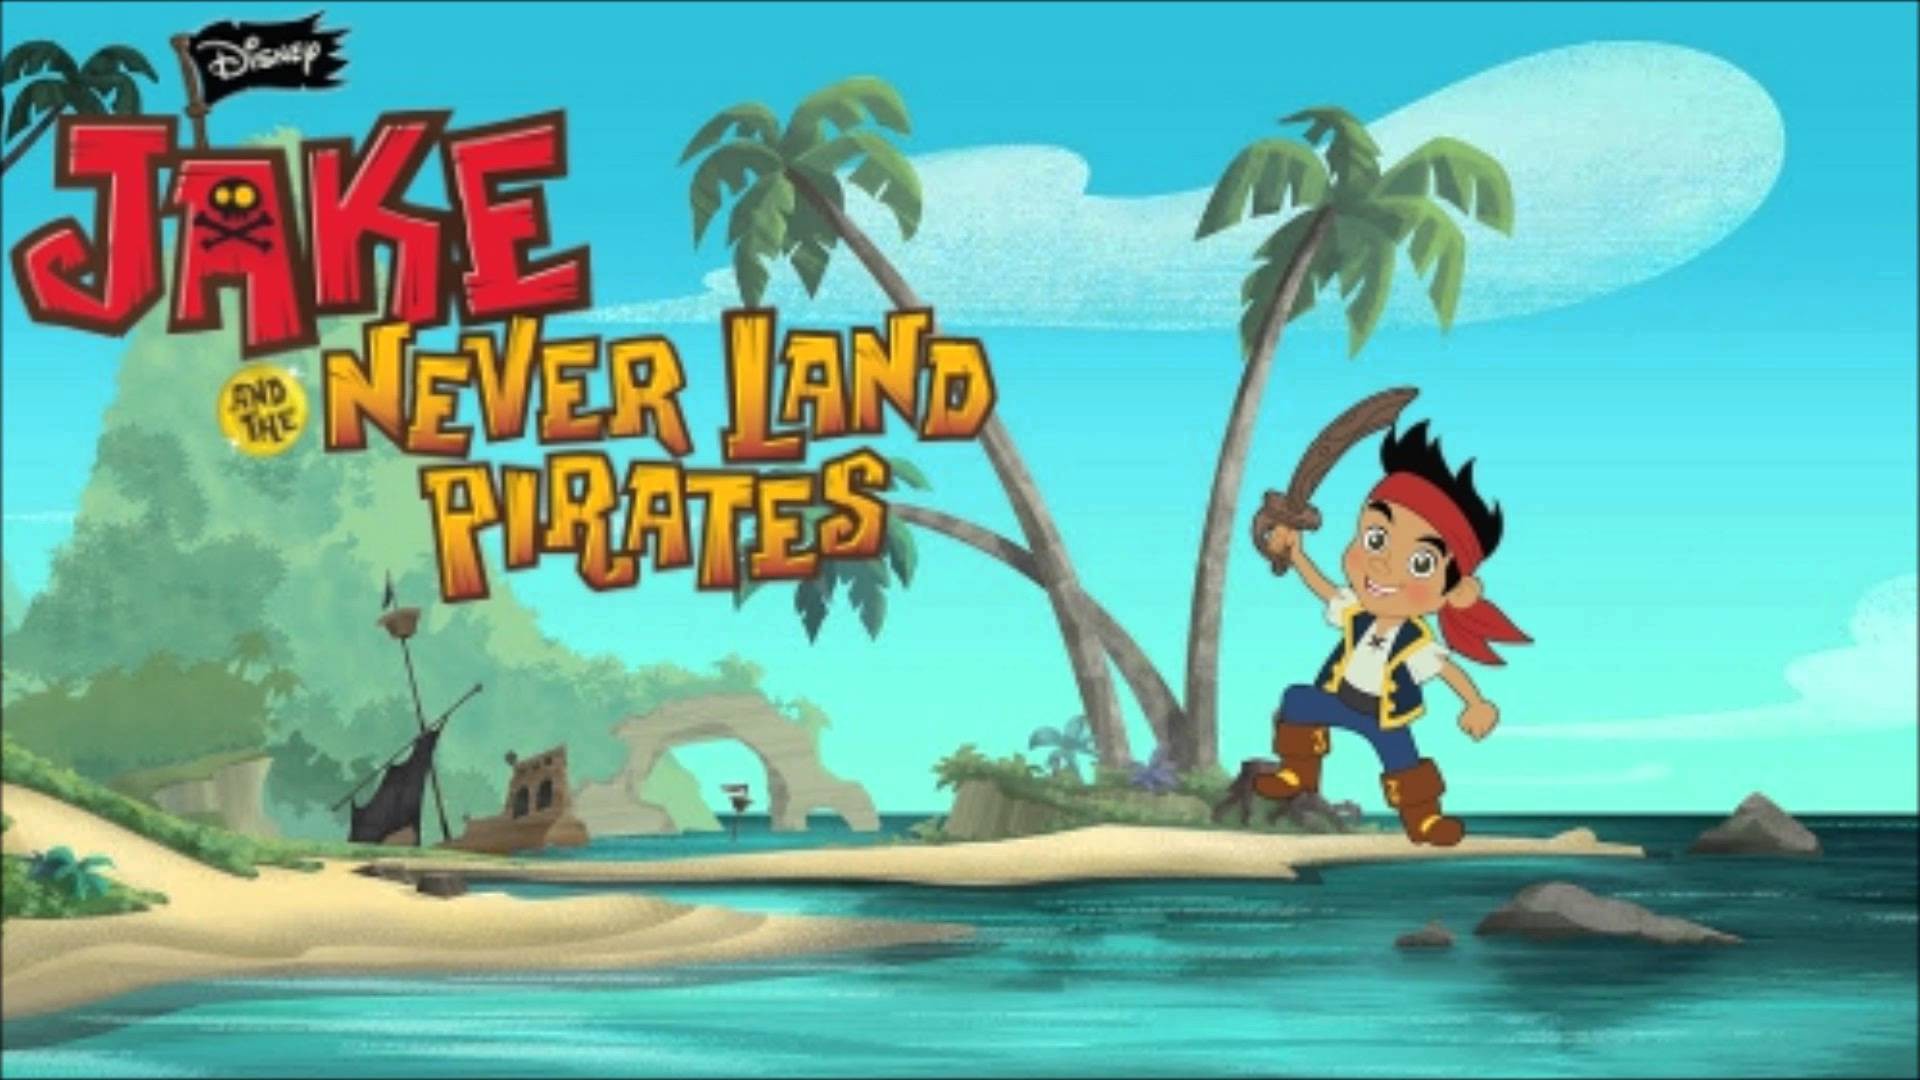 1920x1080 Maxresdefault Jake And The Neverland Pirates Wallpaper